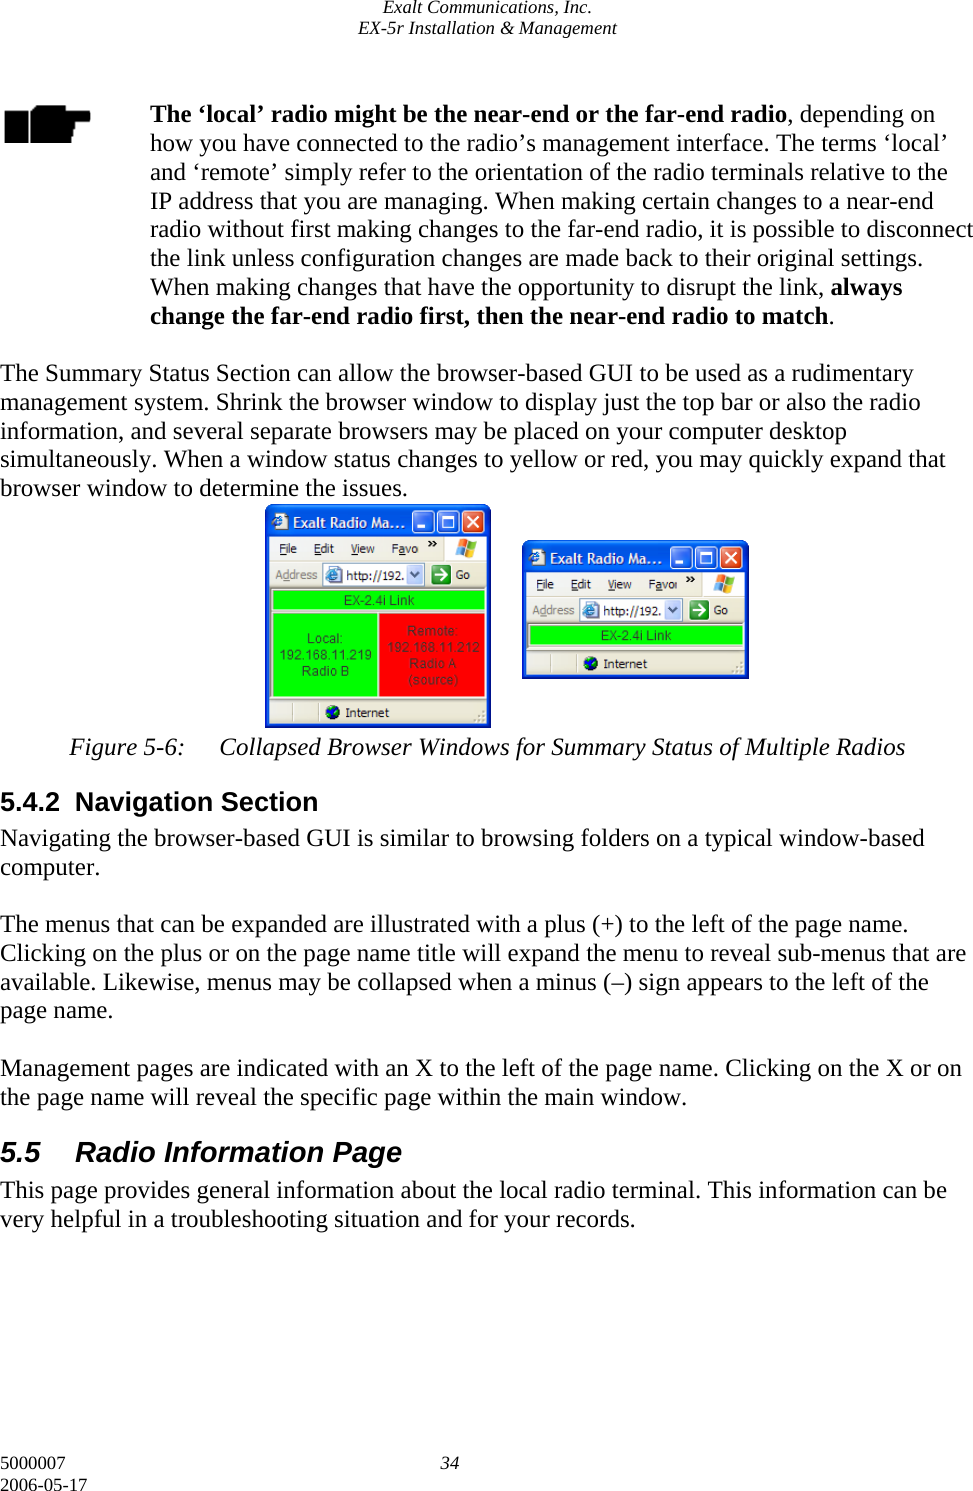 Exalt Communications, Inc. EX-5r Installation &amp; Management 5000007  34 2006-05-17  The ‘local’ radio might be the near-end or the far-end radio, depending on how you have connected to the radio’s management interface. The terms ‘local’ and ‘remote’ simply refer to the orientation of the radio terminals relative to the IP address that you are managing. When making certain changes to a near-end radio without first making changes to the far-end radio, it is possible to disconnect the link unless configuration changes are made back to their original settings. When making changes that have the opportunity to disrupt the link, always change the far-end radio first, then the near-end radio to match.  The Summary Status Section can allow the browser-based GUI to be used as a rudimentary management system. Shrink the browser window to display just the top bar or also the radio information, and several separate browsers may be placed on your computer desktop simultaneously. When a window status changes to yellow or red, you may quickly expand that browser window to determine the issues.         Figure 5-6:  Collapsed Browser Windows for Summary Status of Multiple Radios 5.4.2 Navigation Section Navigating the browser-based GUI is similar to browsing folders on a typical window-based computer.  The menus that can be expanded are illustrated with a plus (+) to the left of the page name. Clicking on the plus or on the page name title will expand the menu to reveal sub-menus that are available. Likewise, menus may be collapsed when a minus (–) sign appears to the left of the page name.  Management pages are indicated with an X to the left of the page name. Clicking on the X or on the page name will reveal the specific page within the main window. 5.5  Radio Information Page This page provides general information about the local radio terminal. This information can be very helpful in a troubleshooting situation and for your records.        